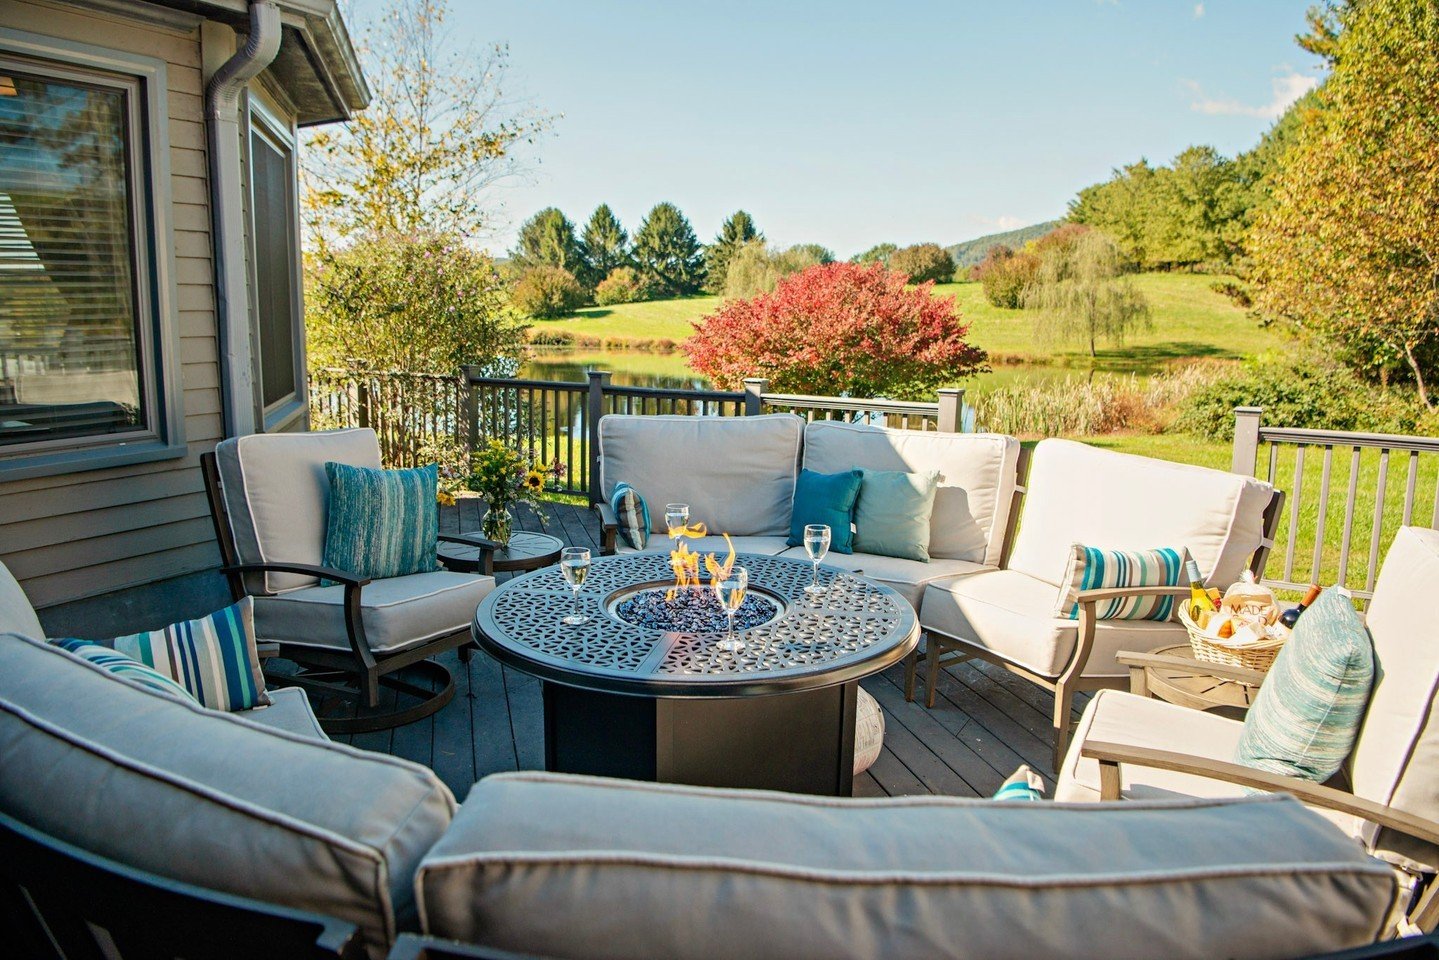 Looking for an amazing getaway or location for your wedding or other special event, just 60 miles from Washington, DC? Check out the Meadows at Castleton. With 11 luxury properties to choose from, there's something for everyone. Pictured here is Magn